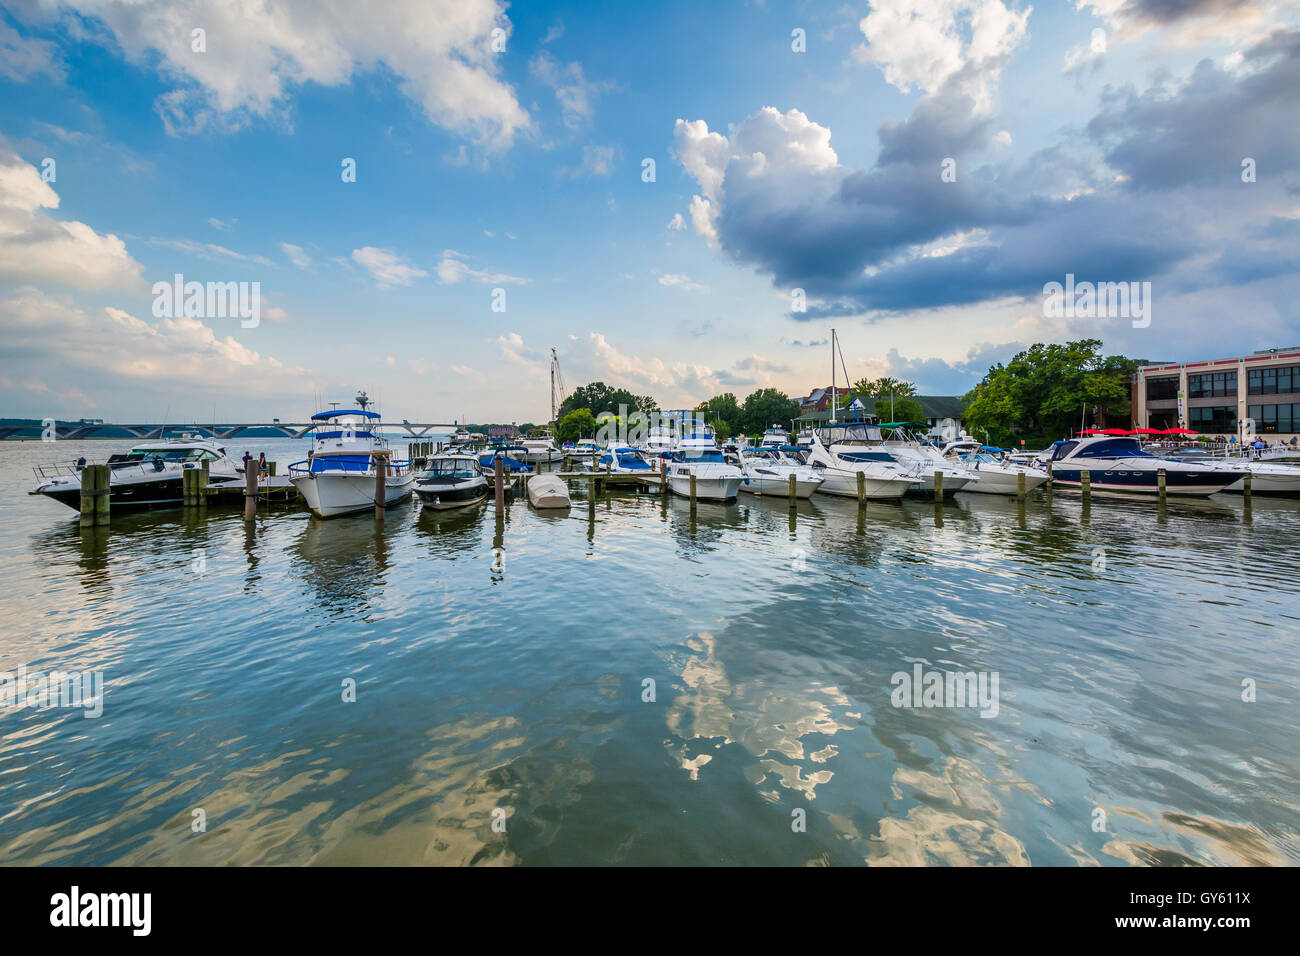 Boote angedockt am Potomac River-Ufer, in Alexandria, Virginia. Stockfoto